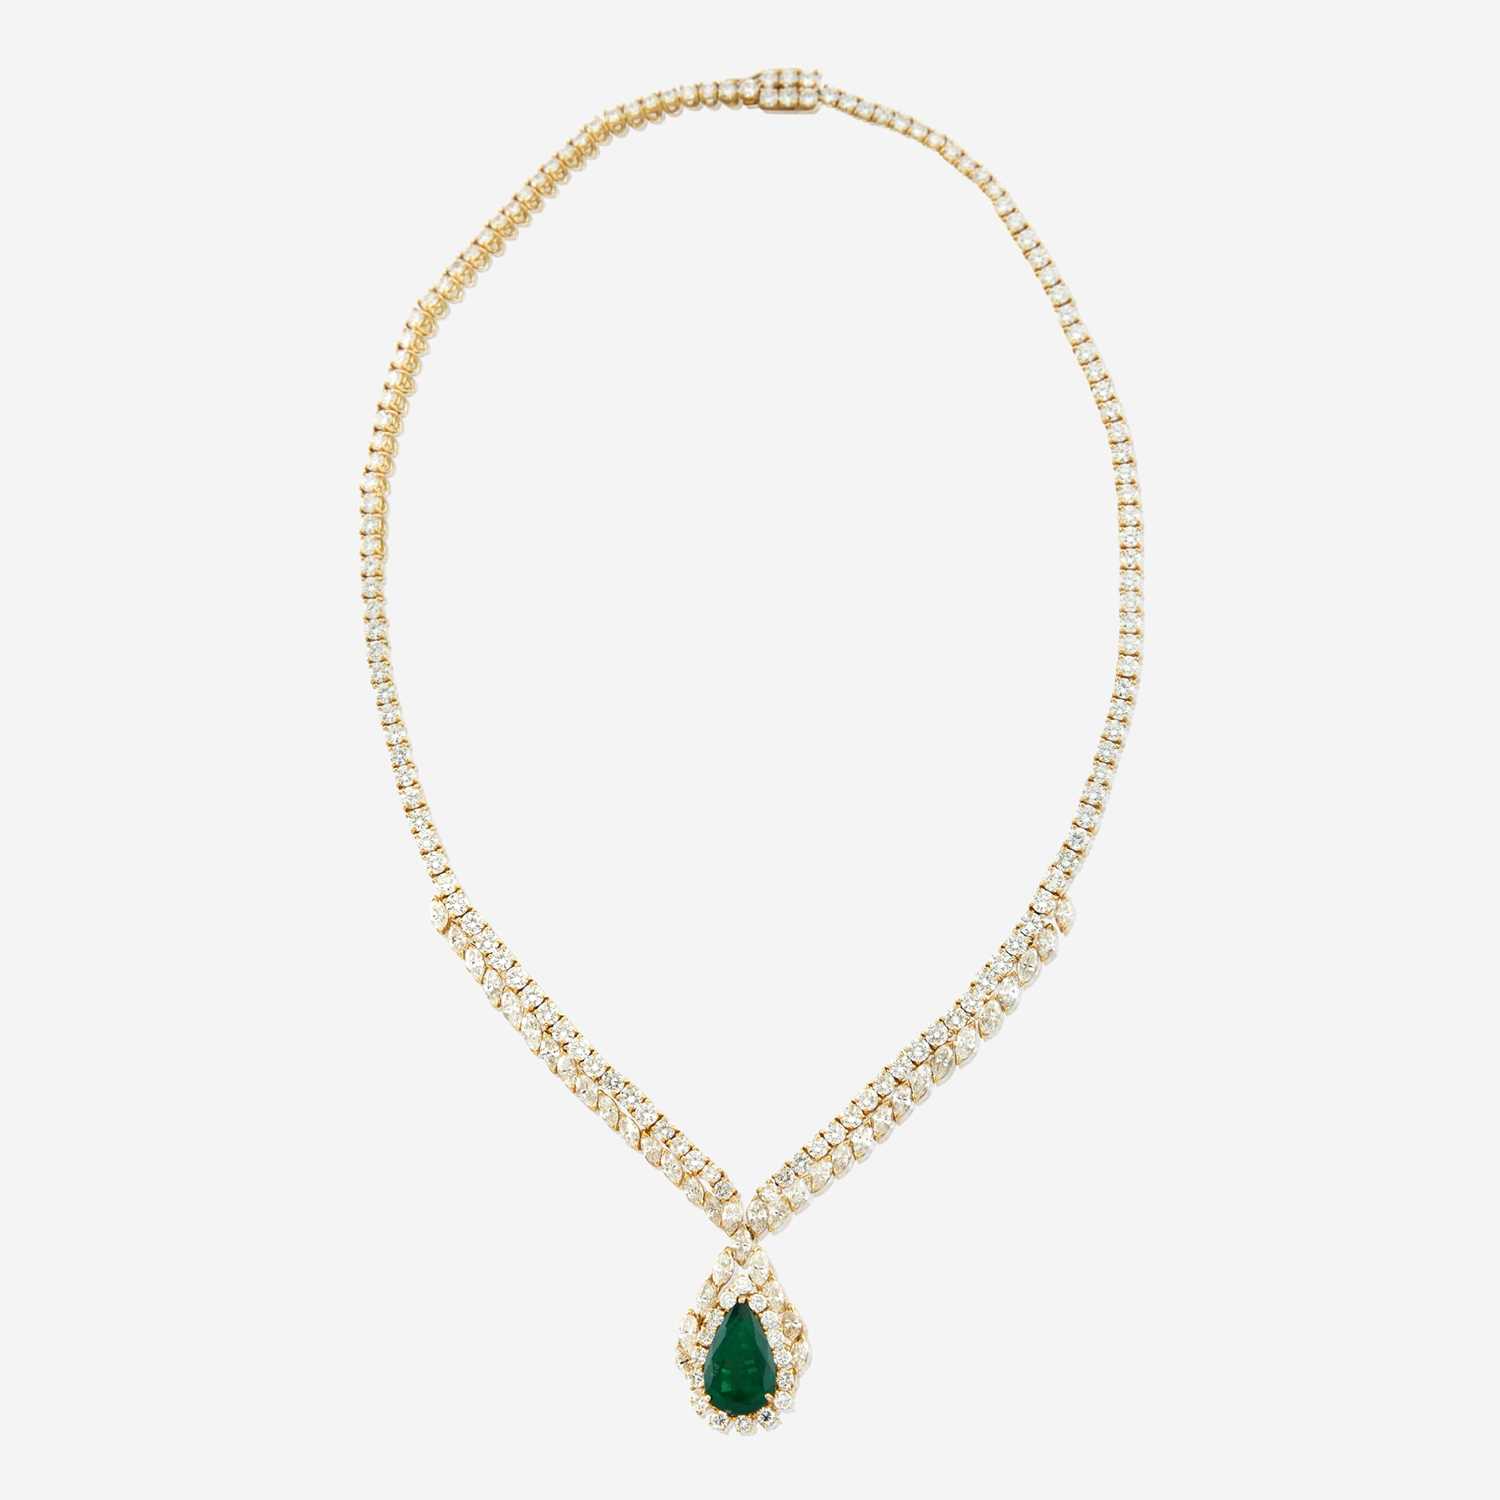 Lot 60 - An emerald, diamond, and gold necklace